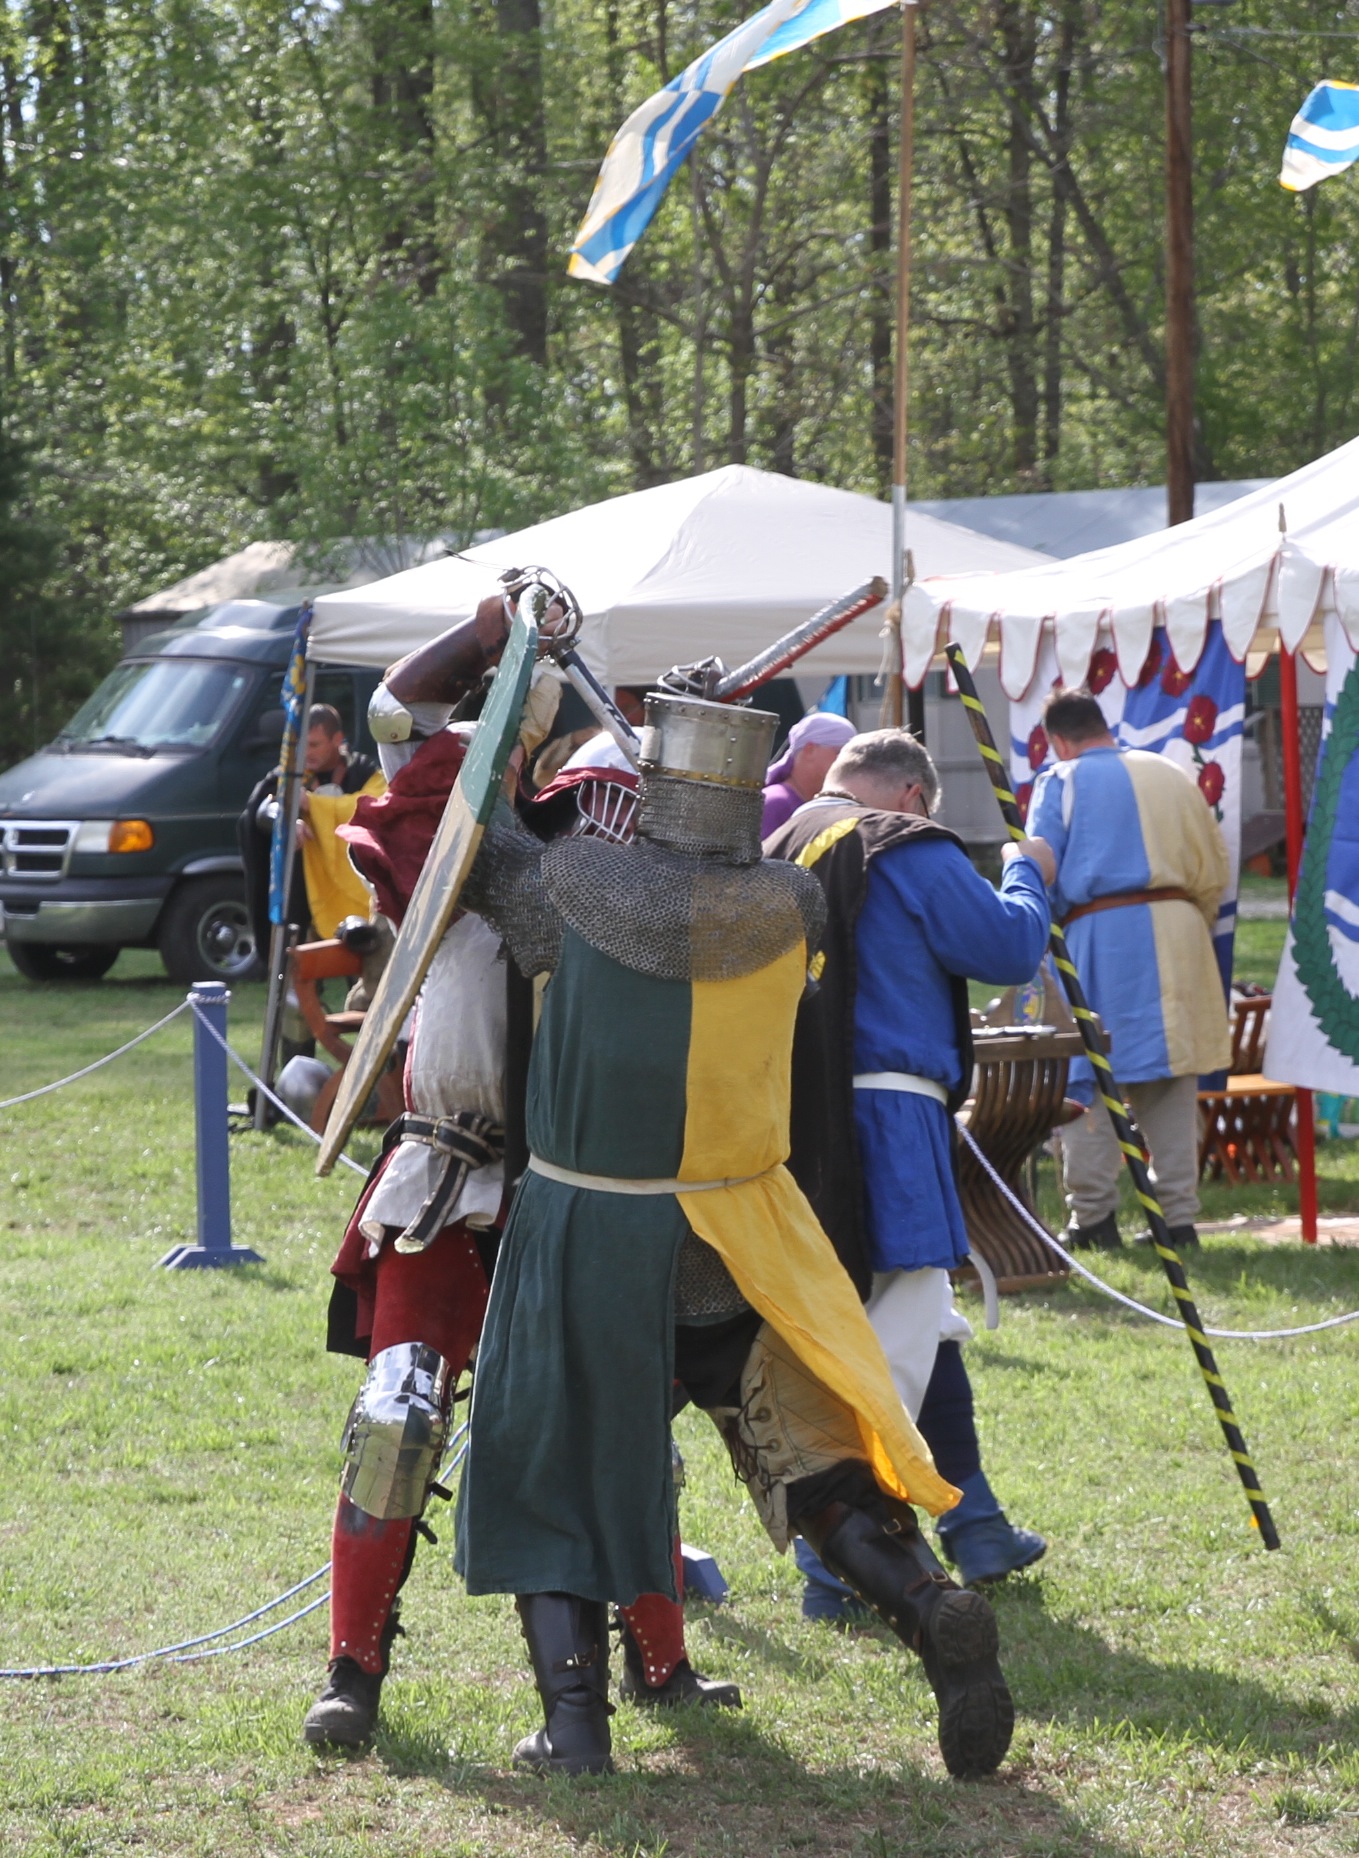 the knights fight in their medieval uniforms as flags fly over them